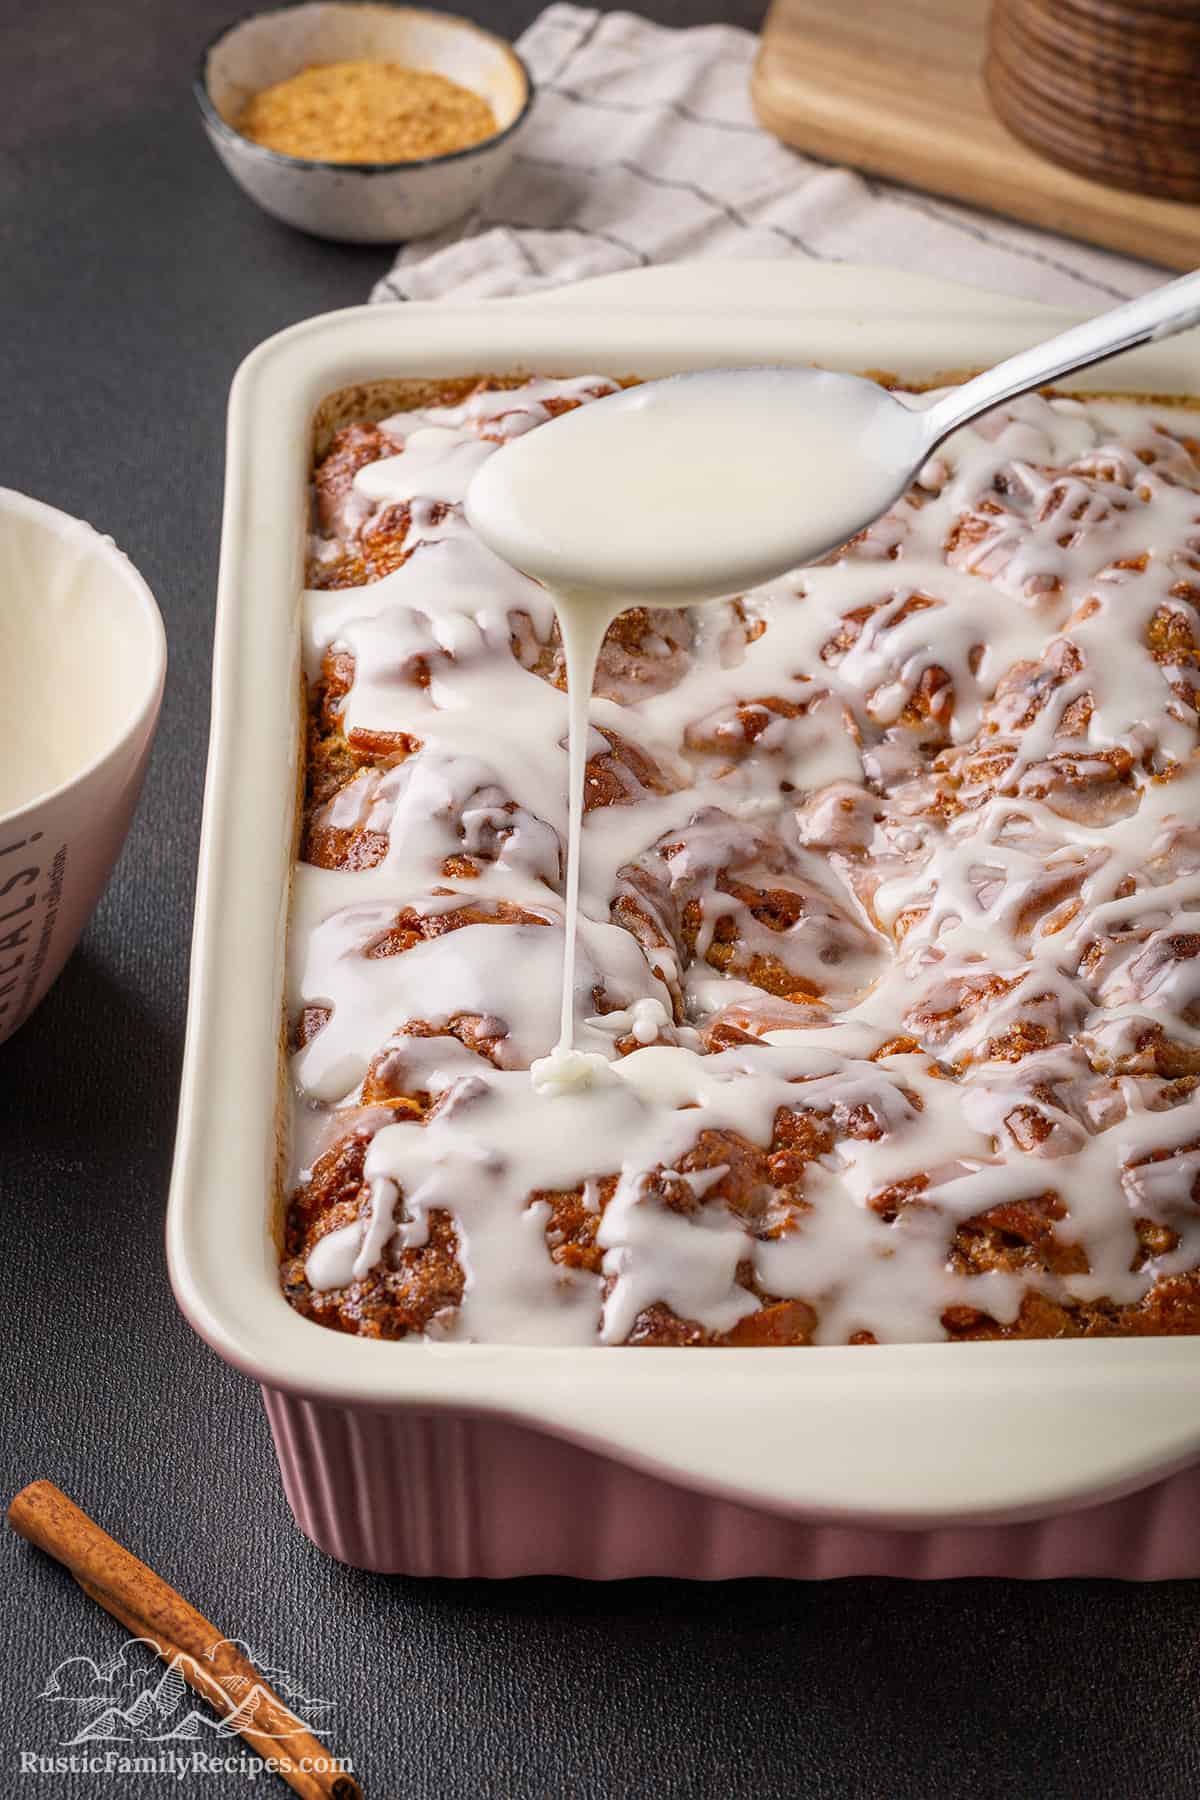 Spoon drizzling icing on a cinnamon roll casserole